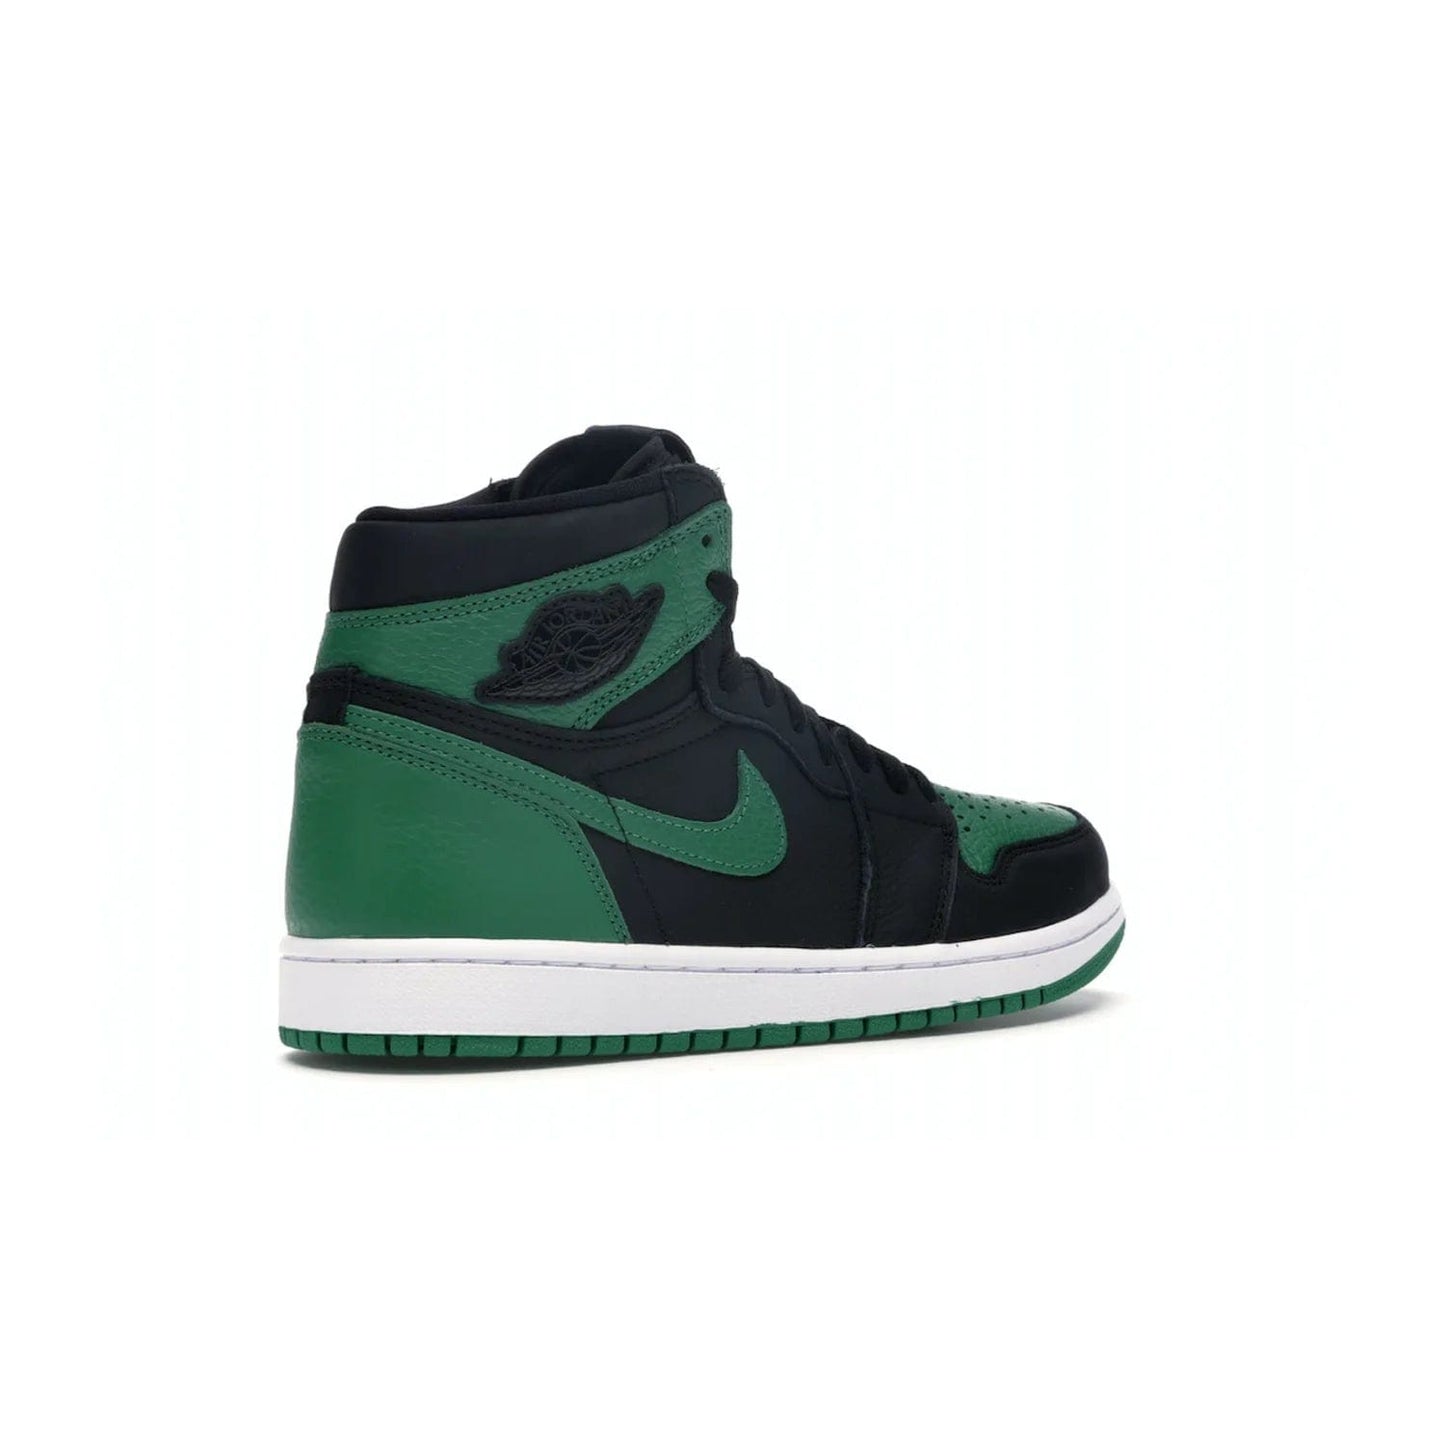 Jordan 1 Retro High Pine Green Black - Image 33 - Only at www.BallersClubKickz.com - Step into fresh style with the Jordan 1 Retro High Pine Green Black. Combining a black tumbled leather upper with green leather overlays, this sneaker features a Gym Red embroidered tongue tag, sail midsole, and pine green outsole for iconic style with a unique twist.